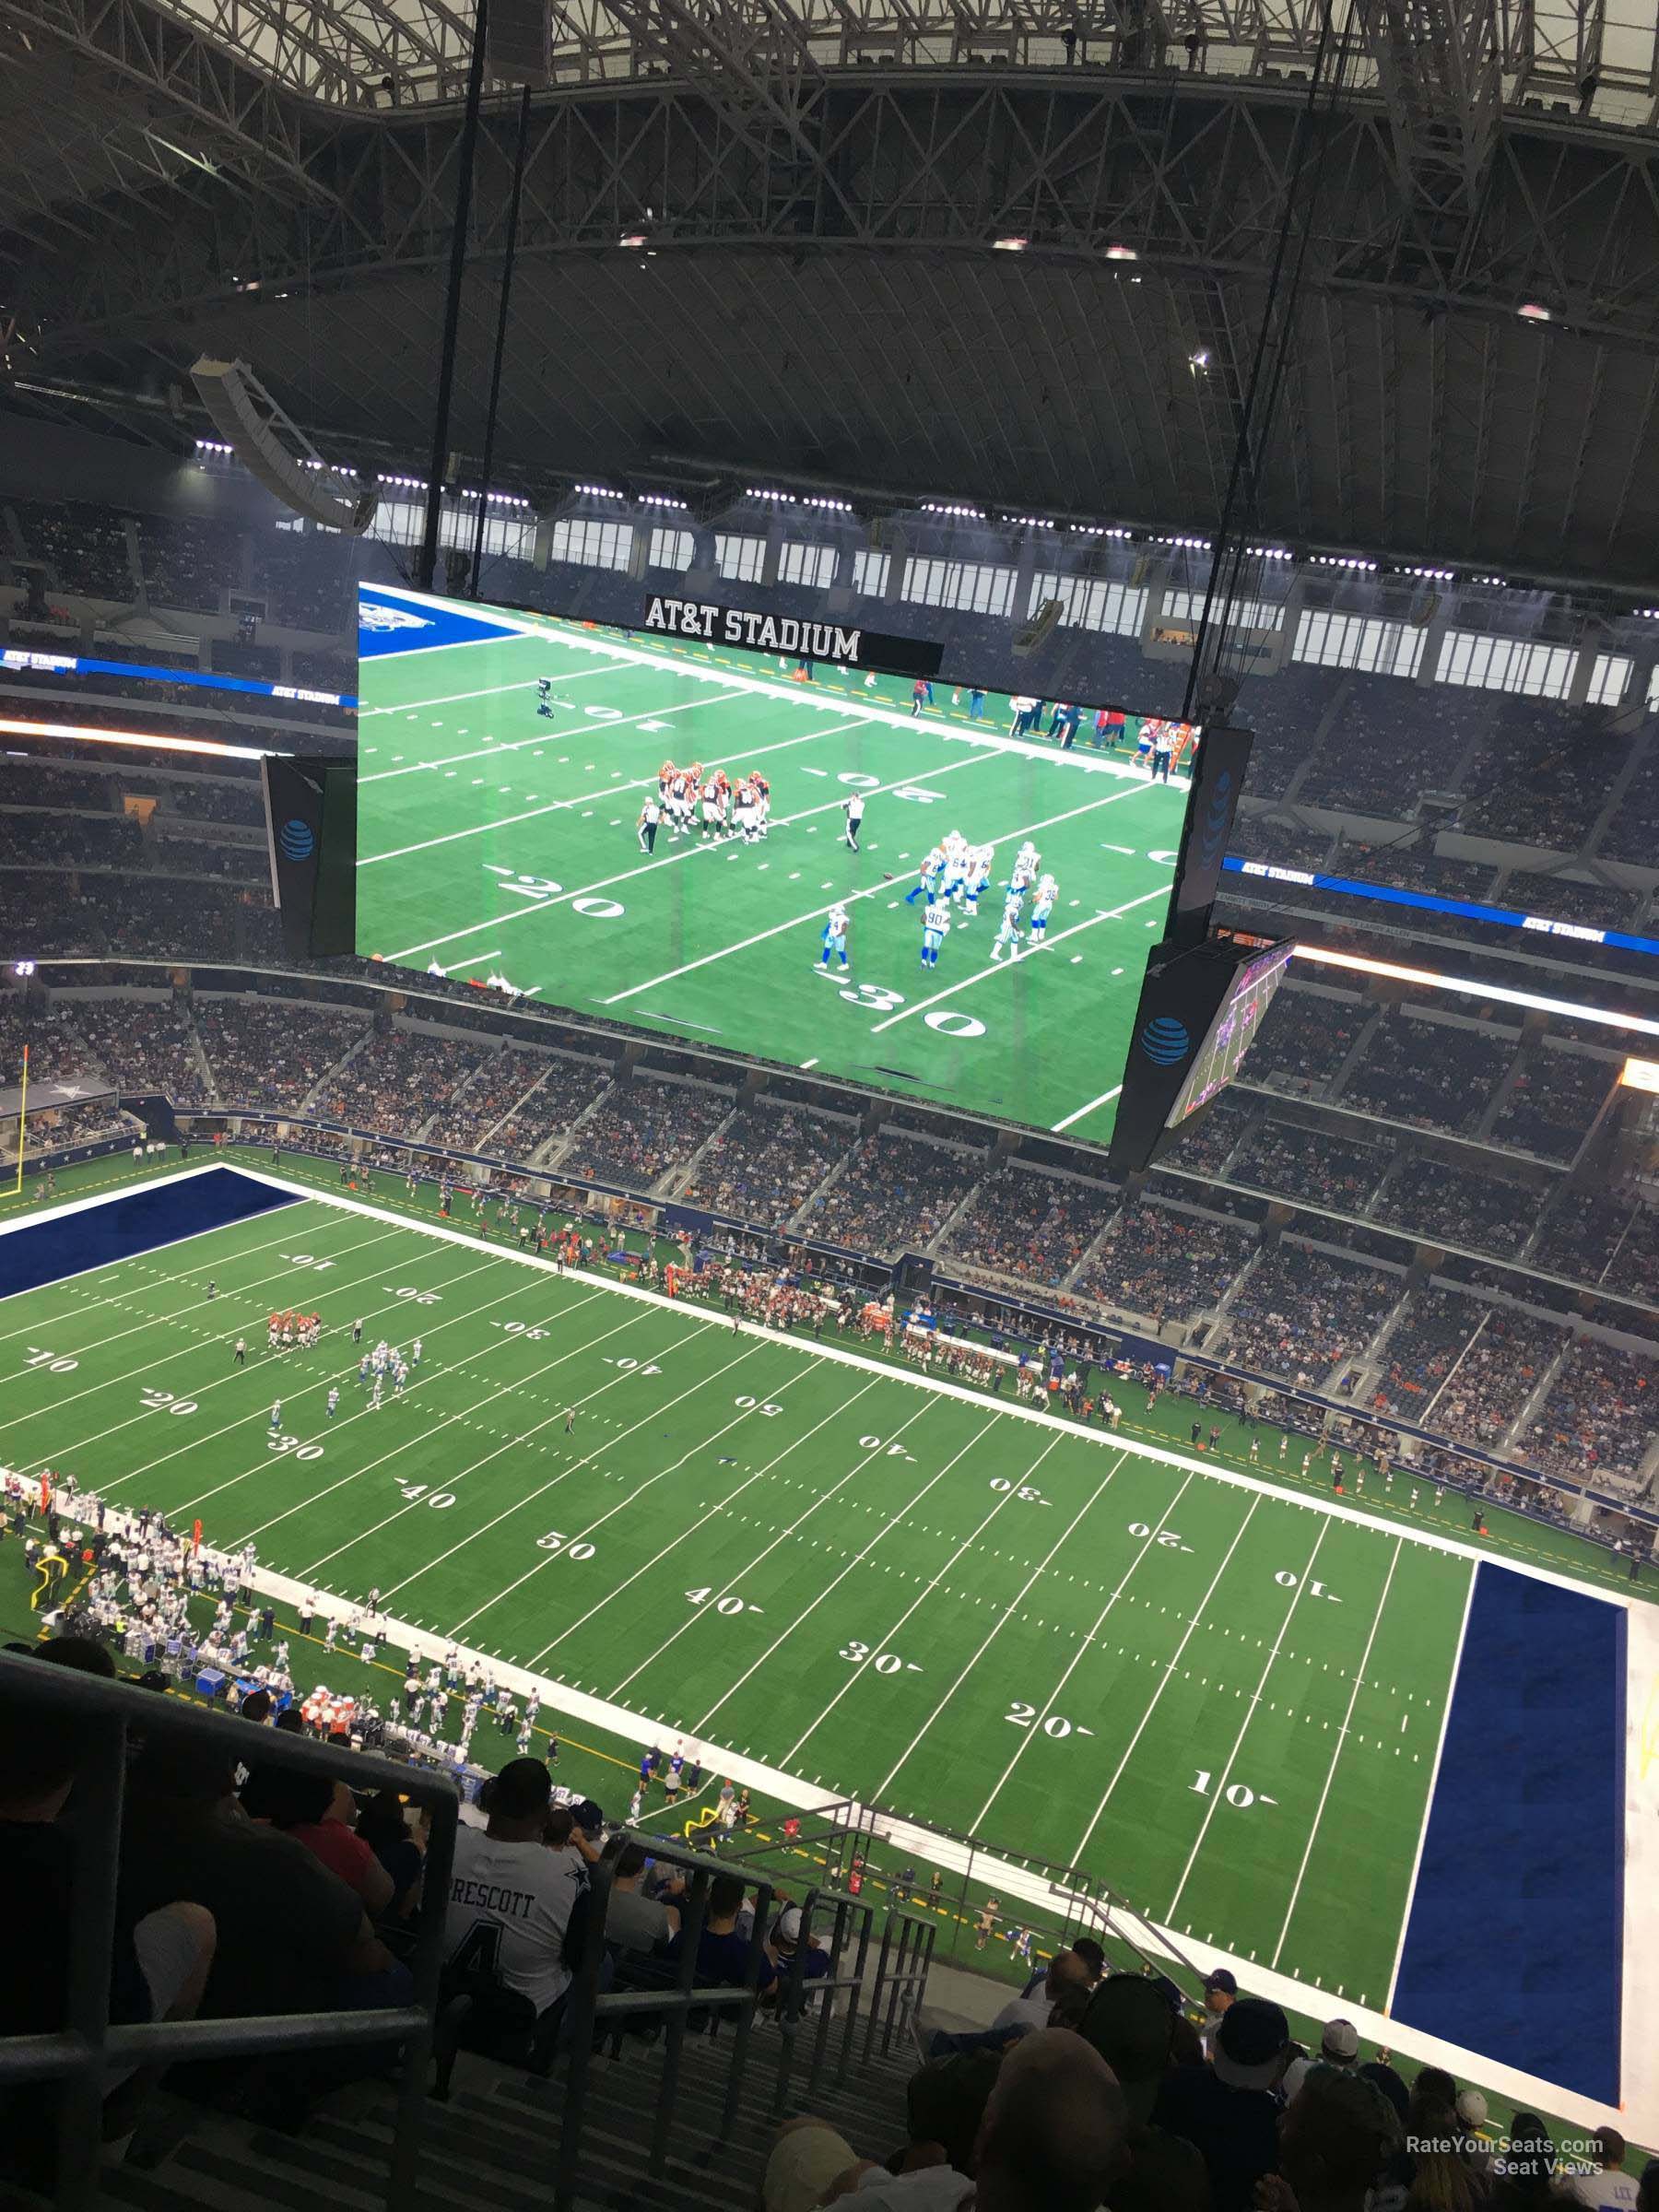 section 406, row 22 seat view  for football - at&t stadium (cowboys stadium)